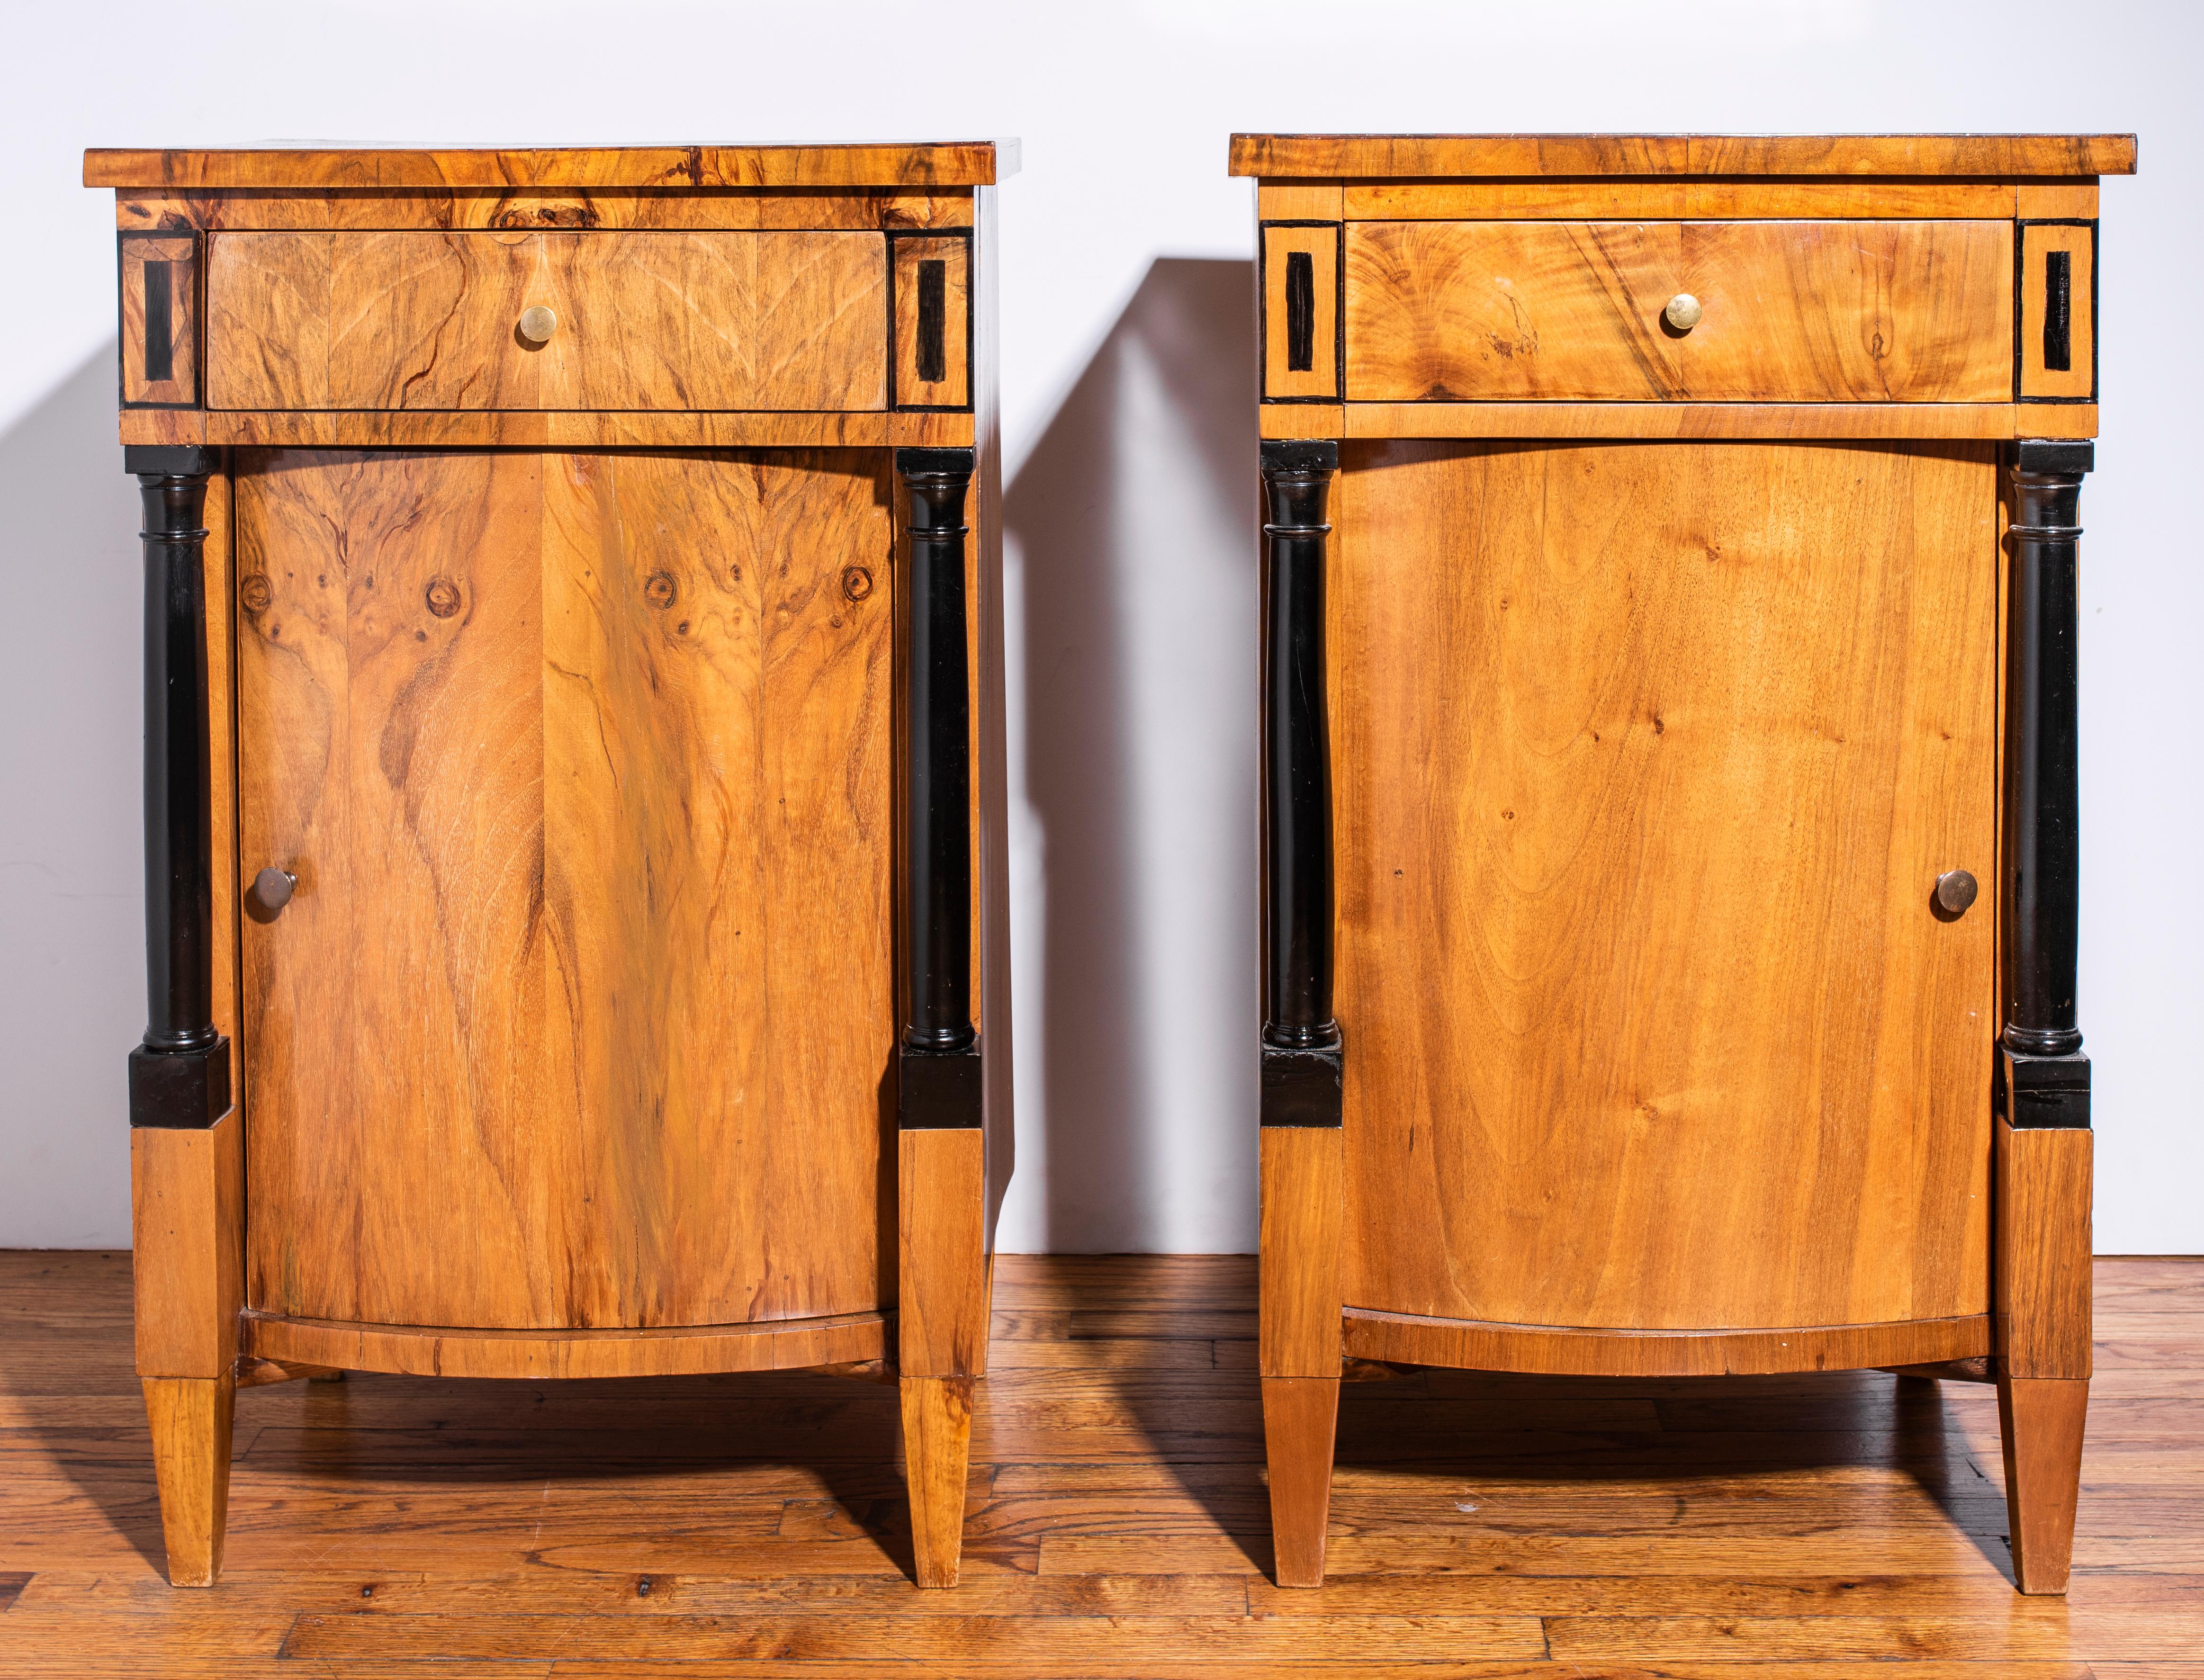 German Biedermeier pair of walnut nightstands with ebonized columns and detailing, early to mid-19th century. 33